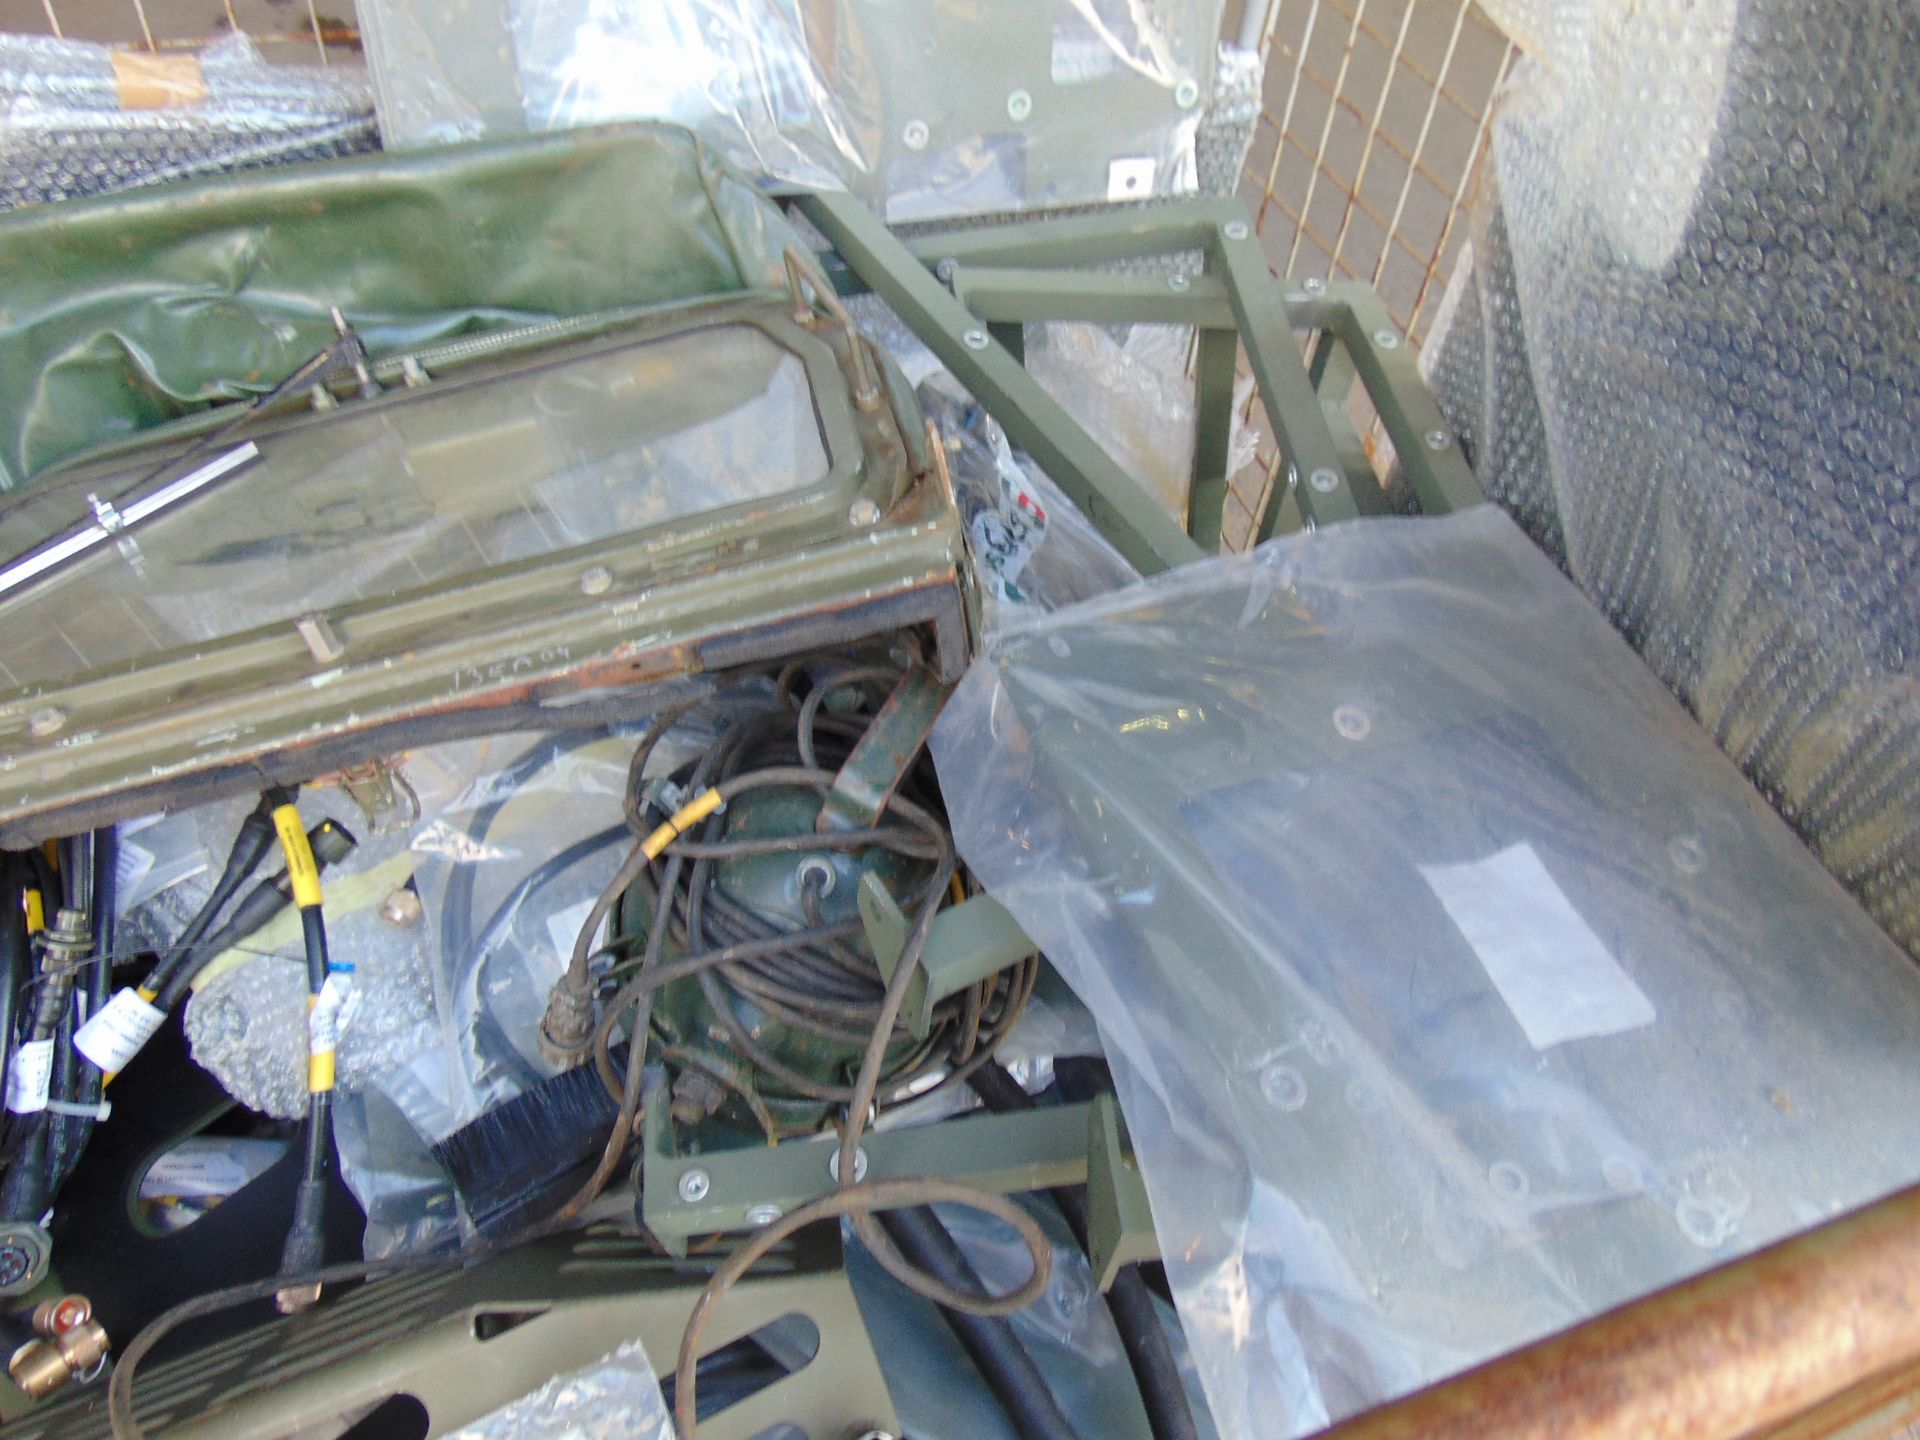 1 x Stillage of Unissued AFV Spares / CES Windscreen, Covers, Cable, Radio Mountings Etc - Image 5 of 5